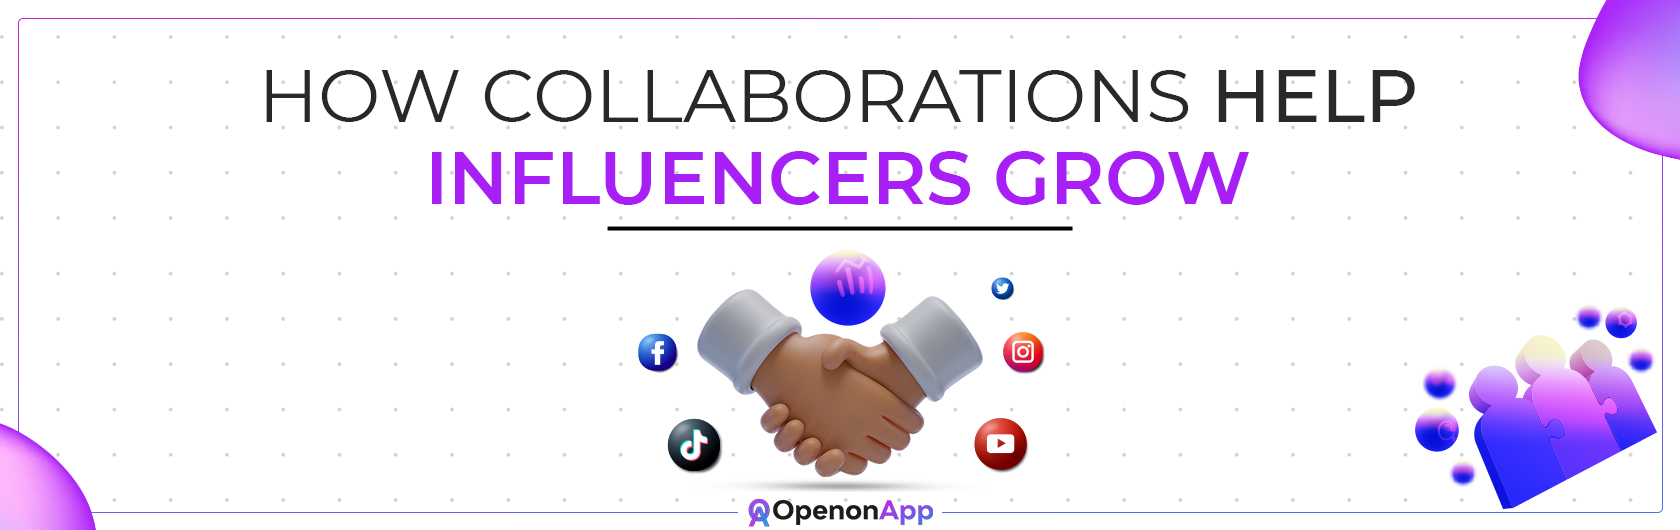 collaborations help influencers grow